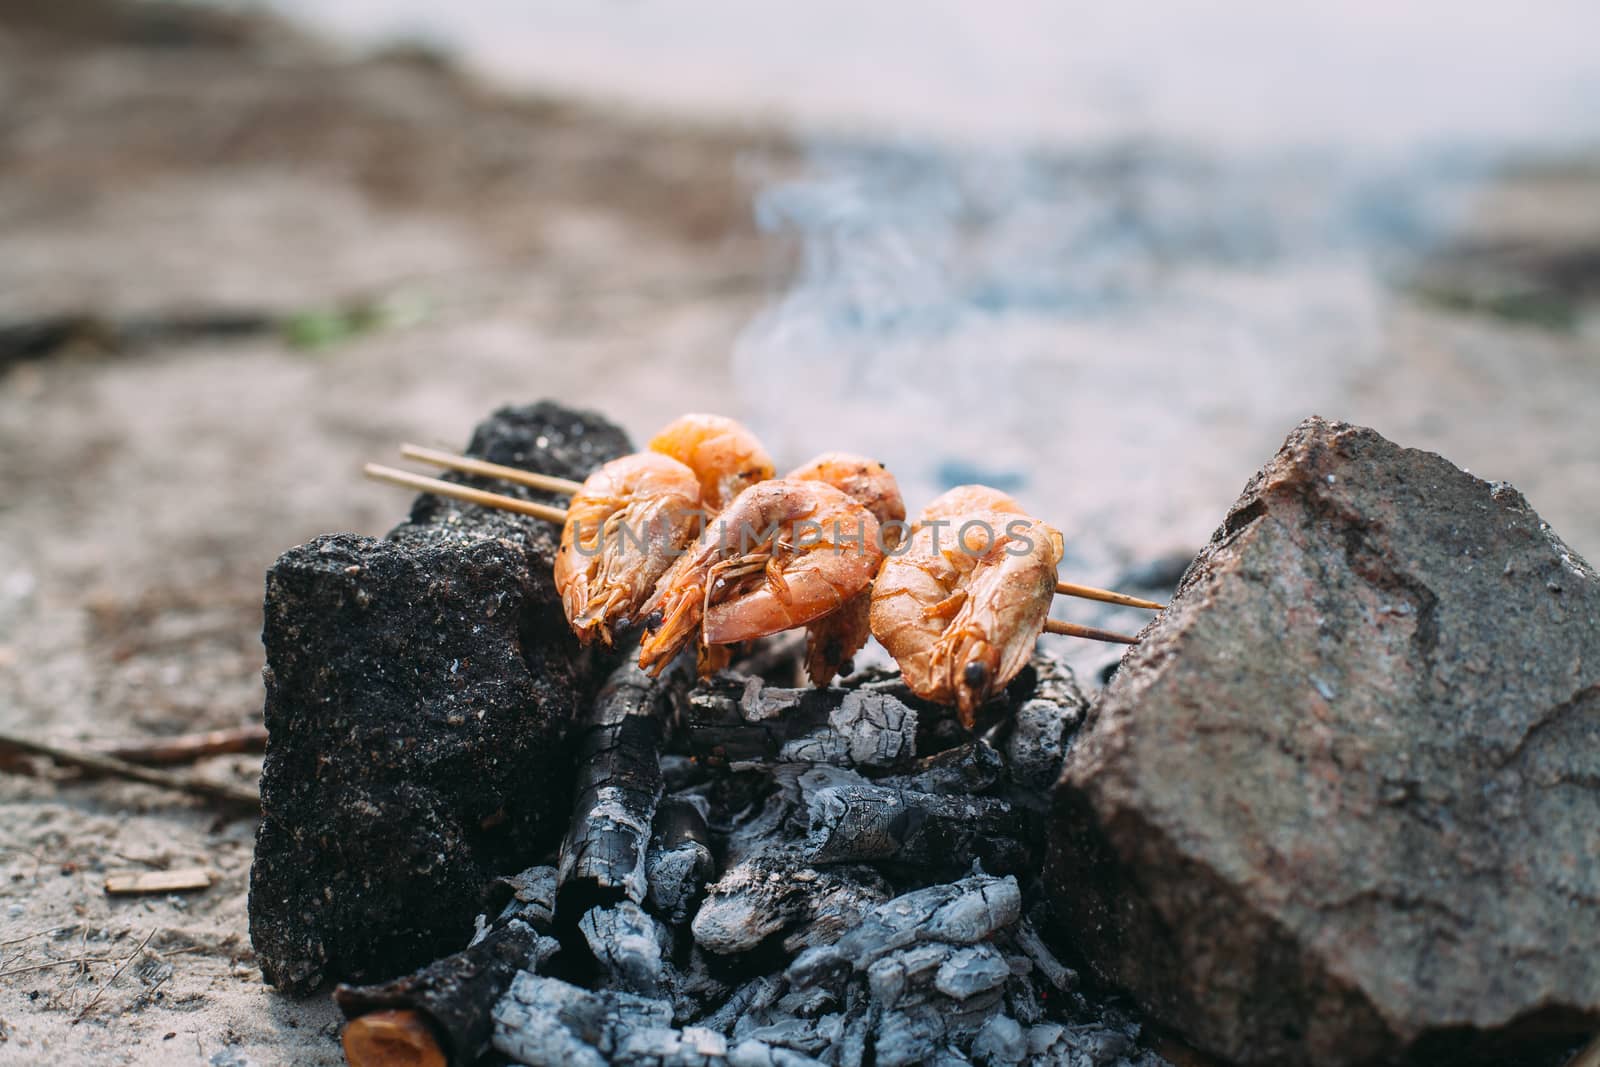 King prawns grilled on charcoal. Food outdoors. Cooking at the s by Opikanets